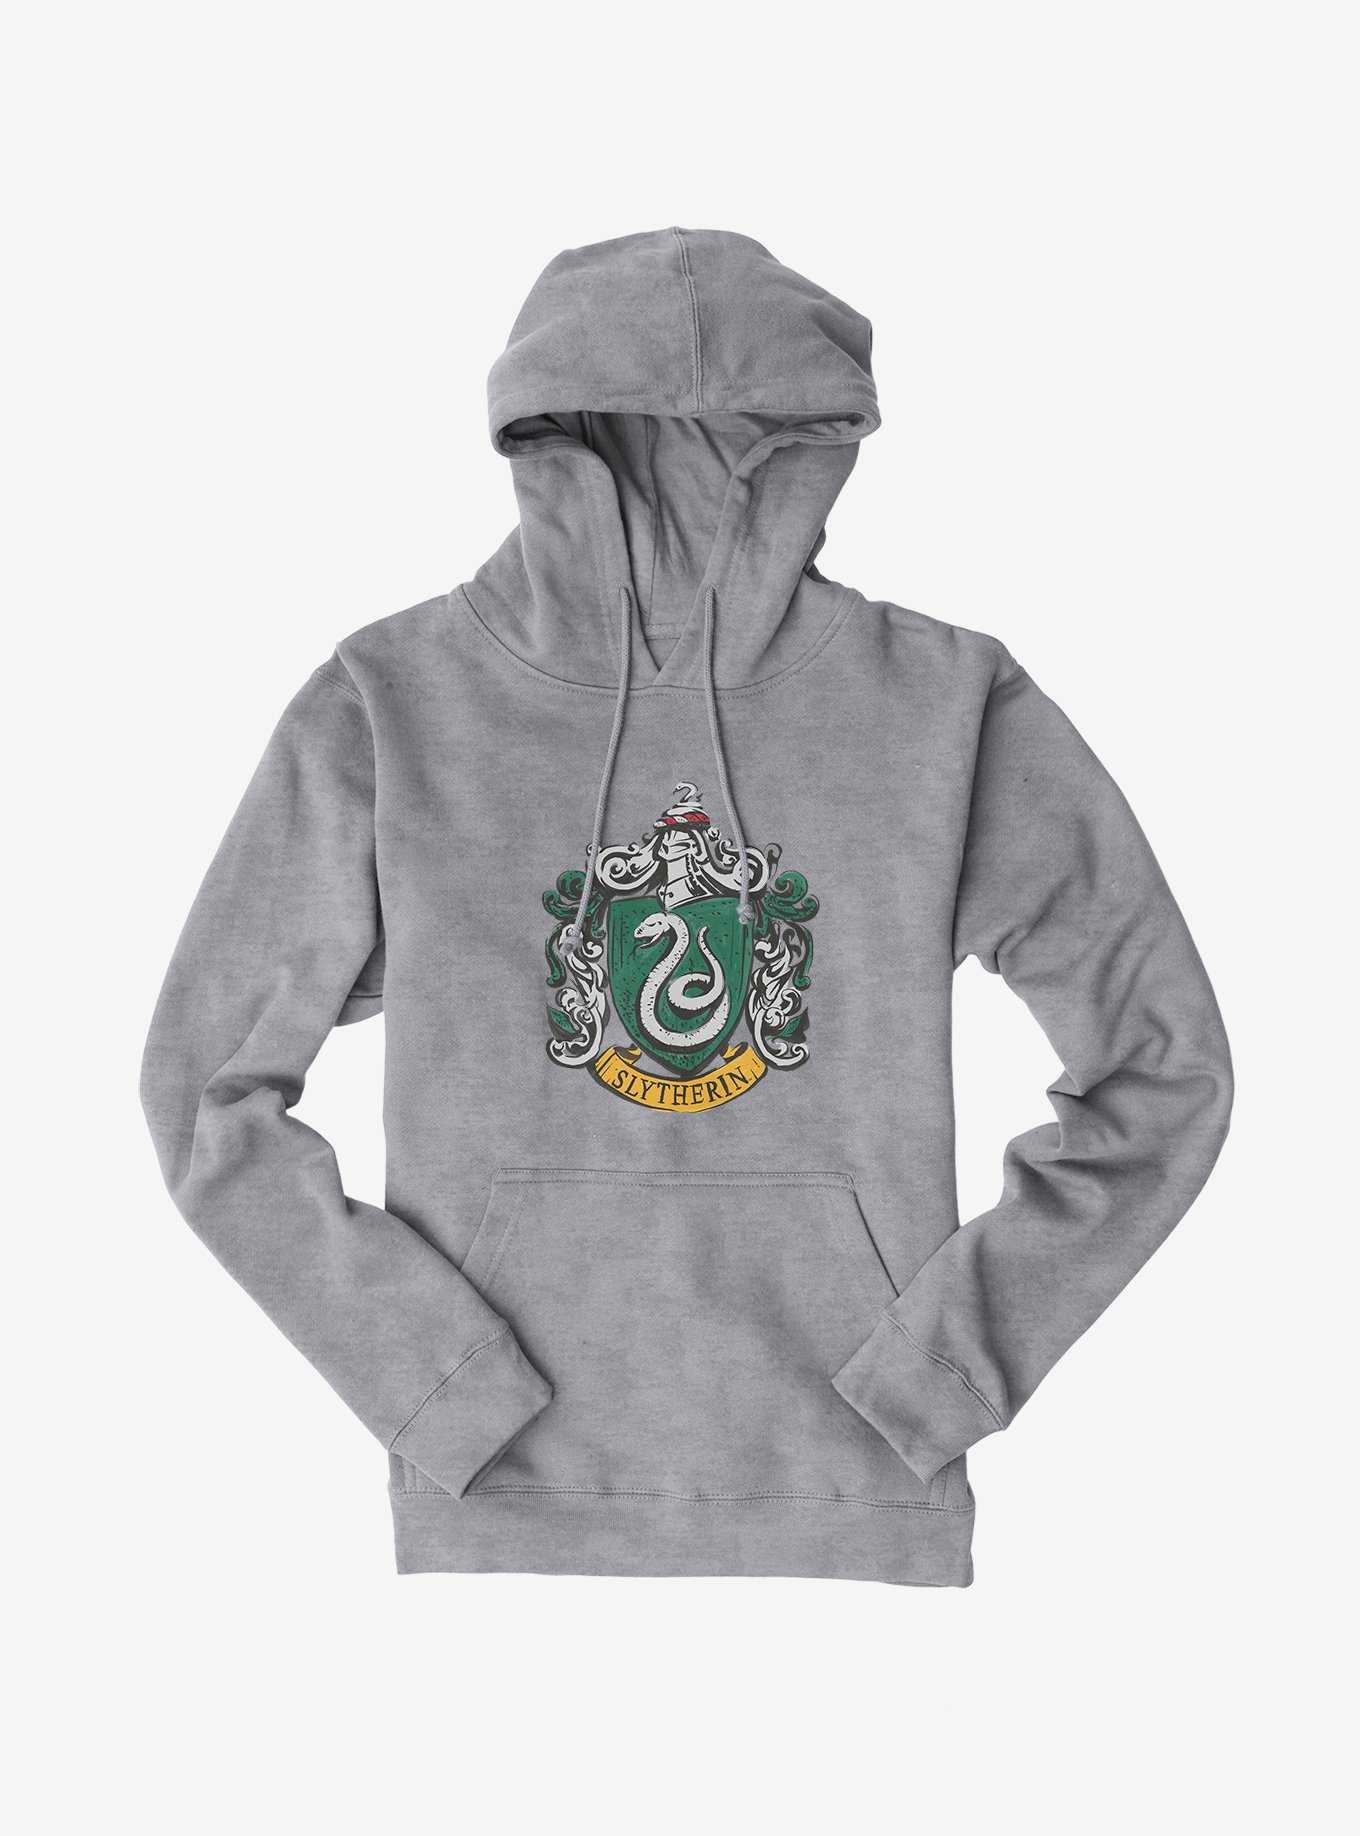 & | Hot Potter Hoodies OFFICIAL Harry Topic Sweaters